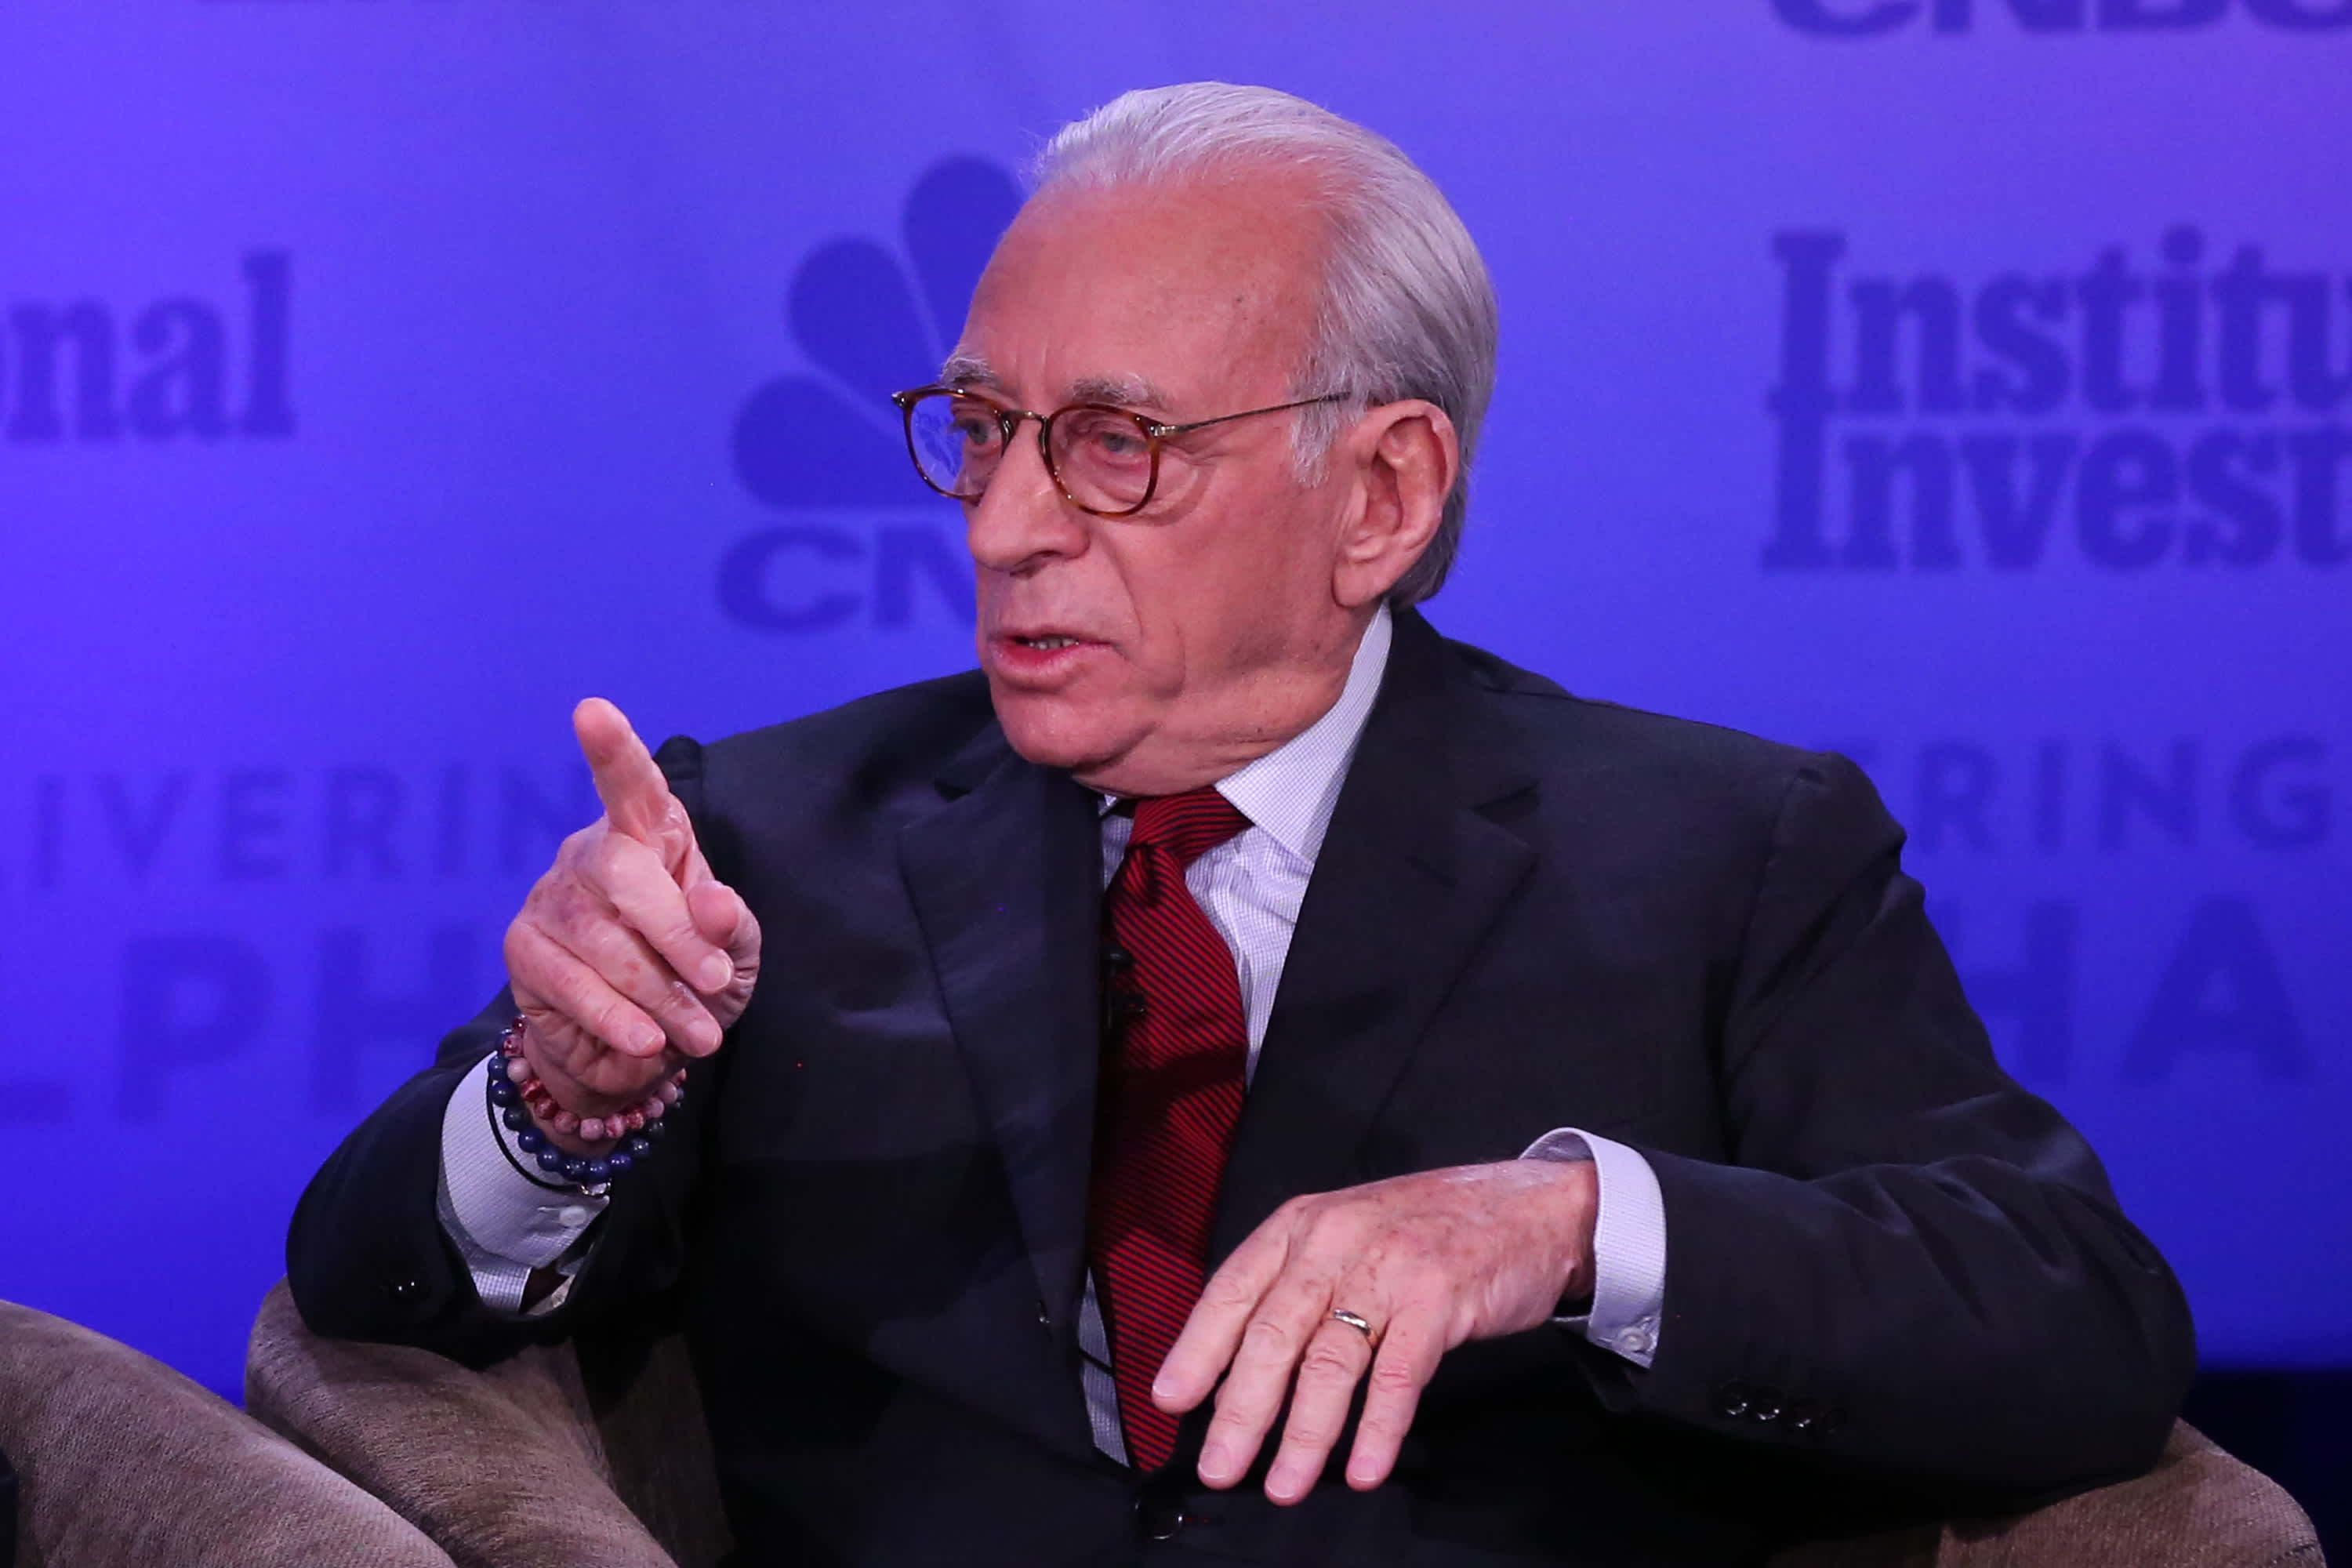 Disney could use an activist investor like Nelson Peltz to help get its financial house in order